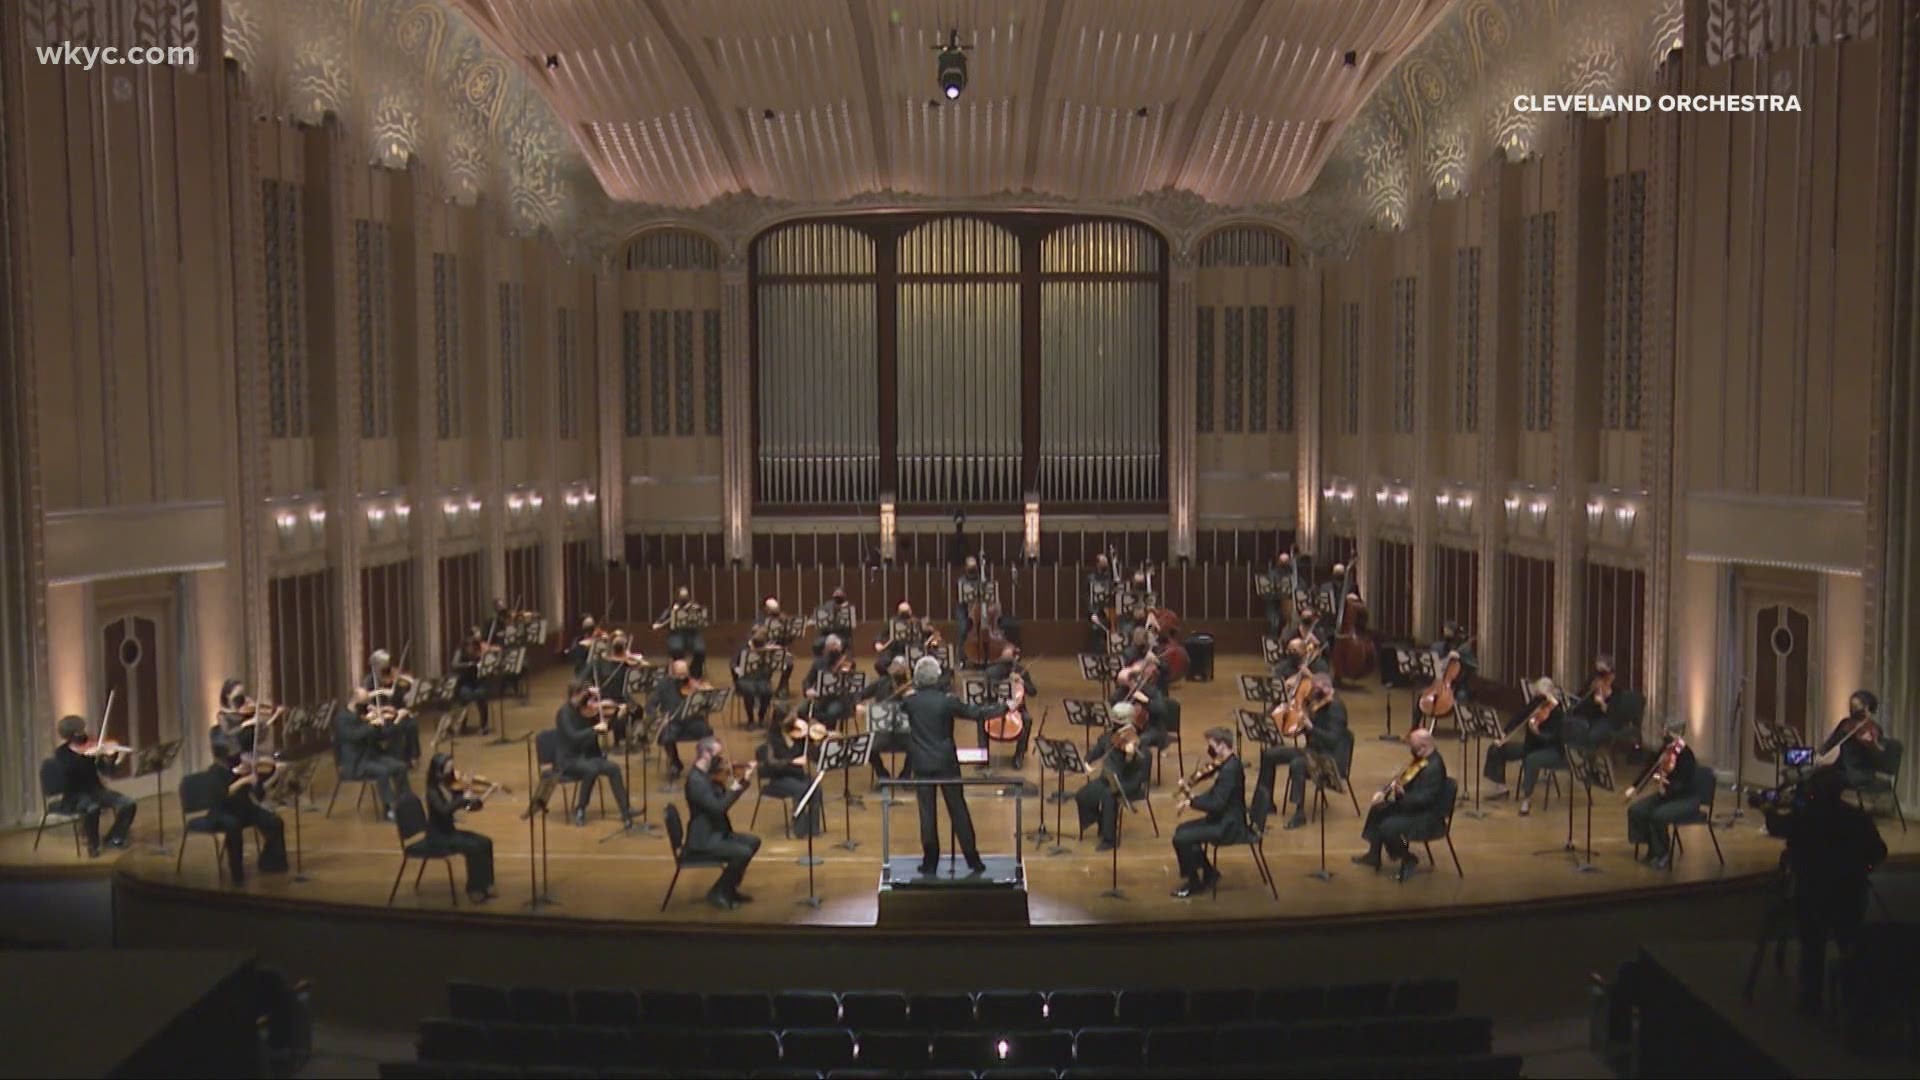 Cleveland Orchestra cancels holiday concerts due to COVID19